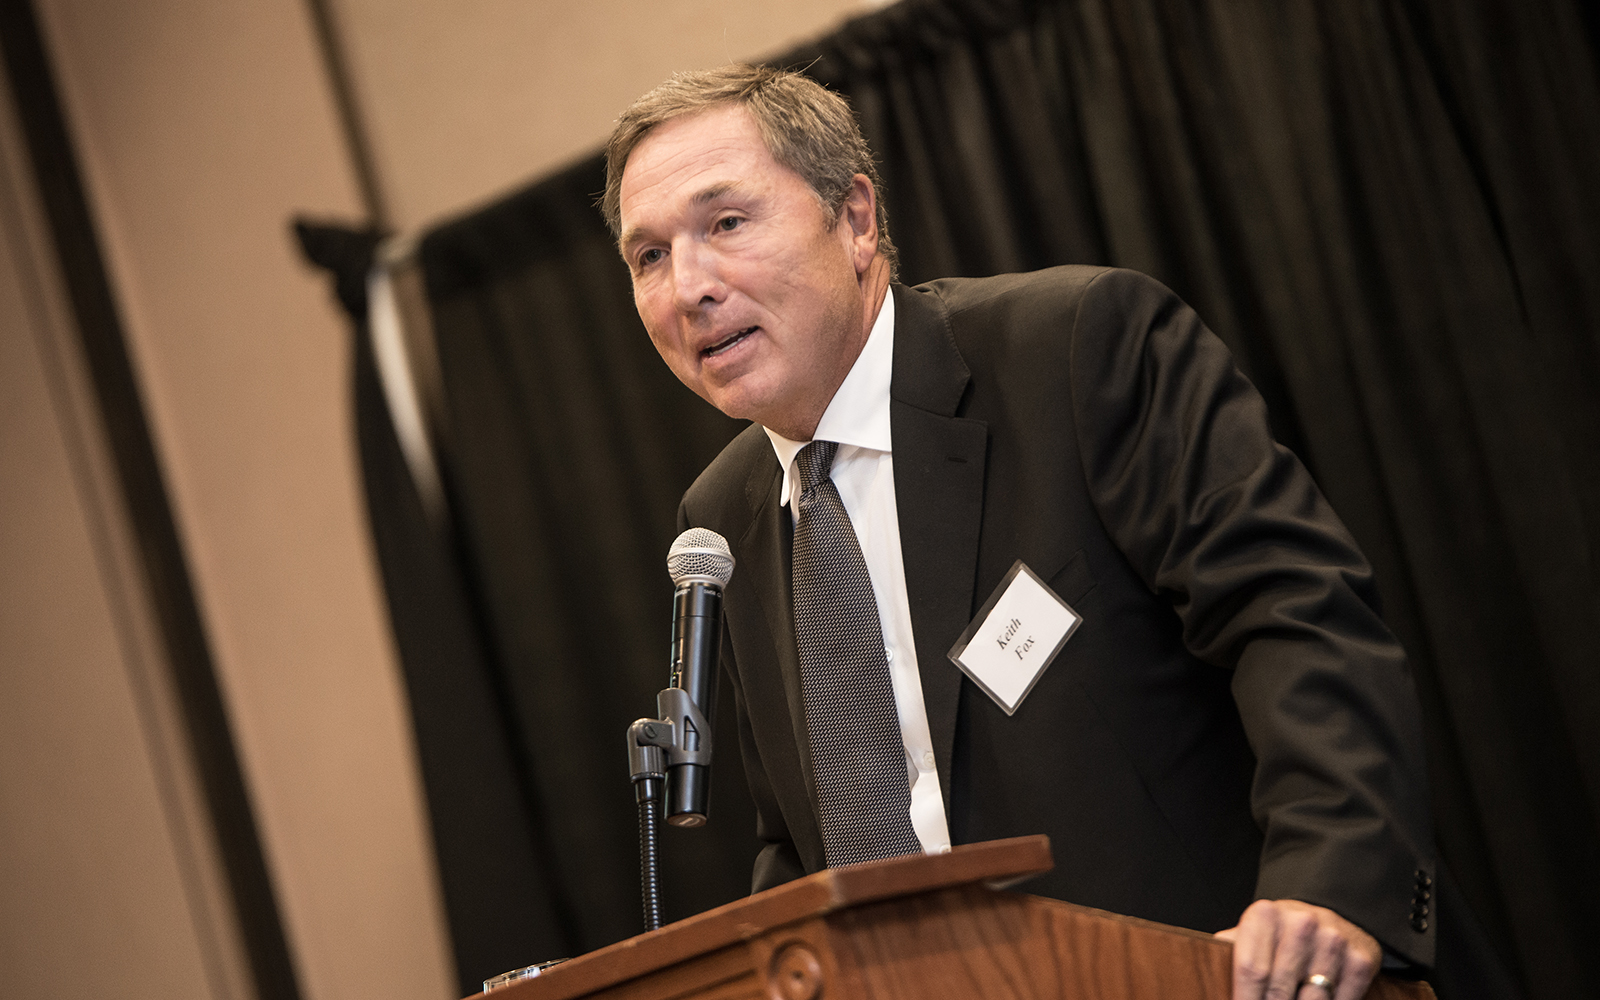 Keith Fox '80, addressing attendees at the 2017 iQ Awards dinner this past spring. (Nathan Oldham/UConn School of Business)